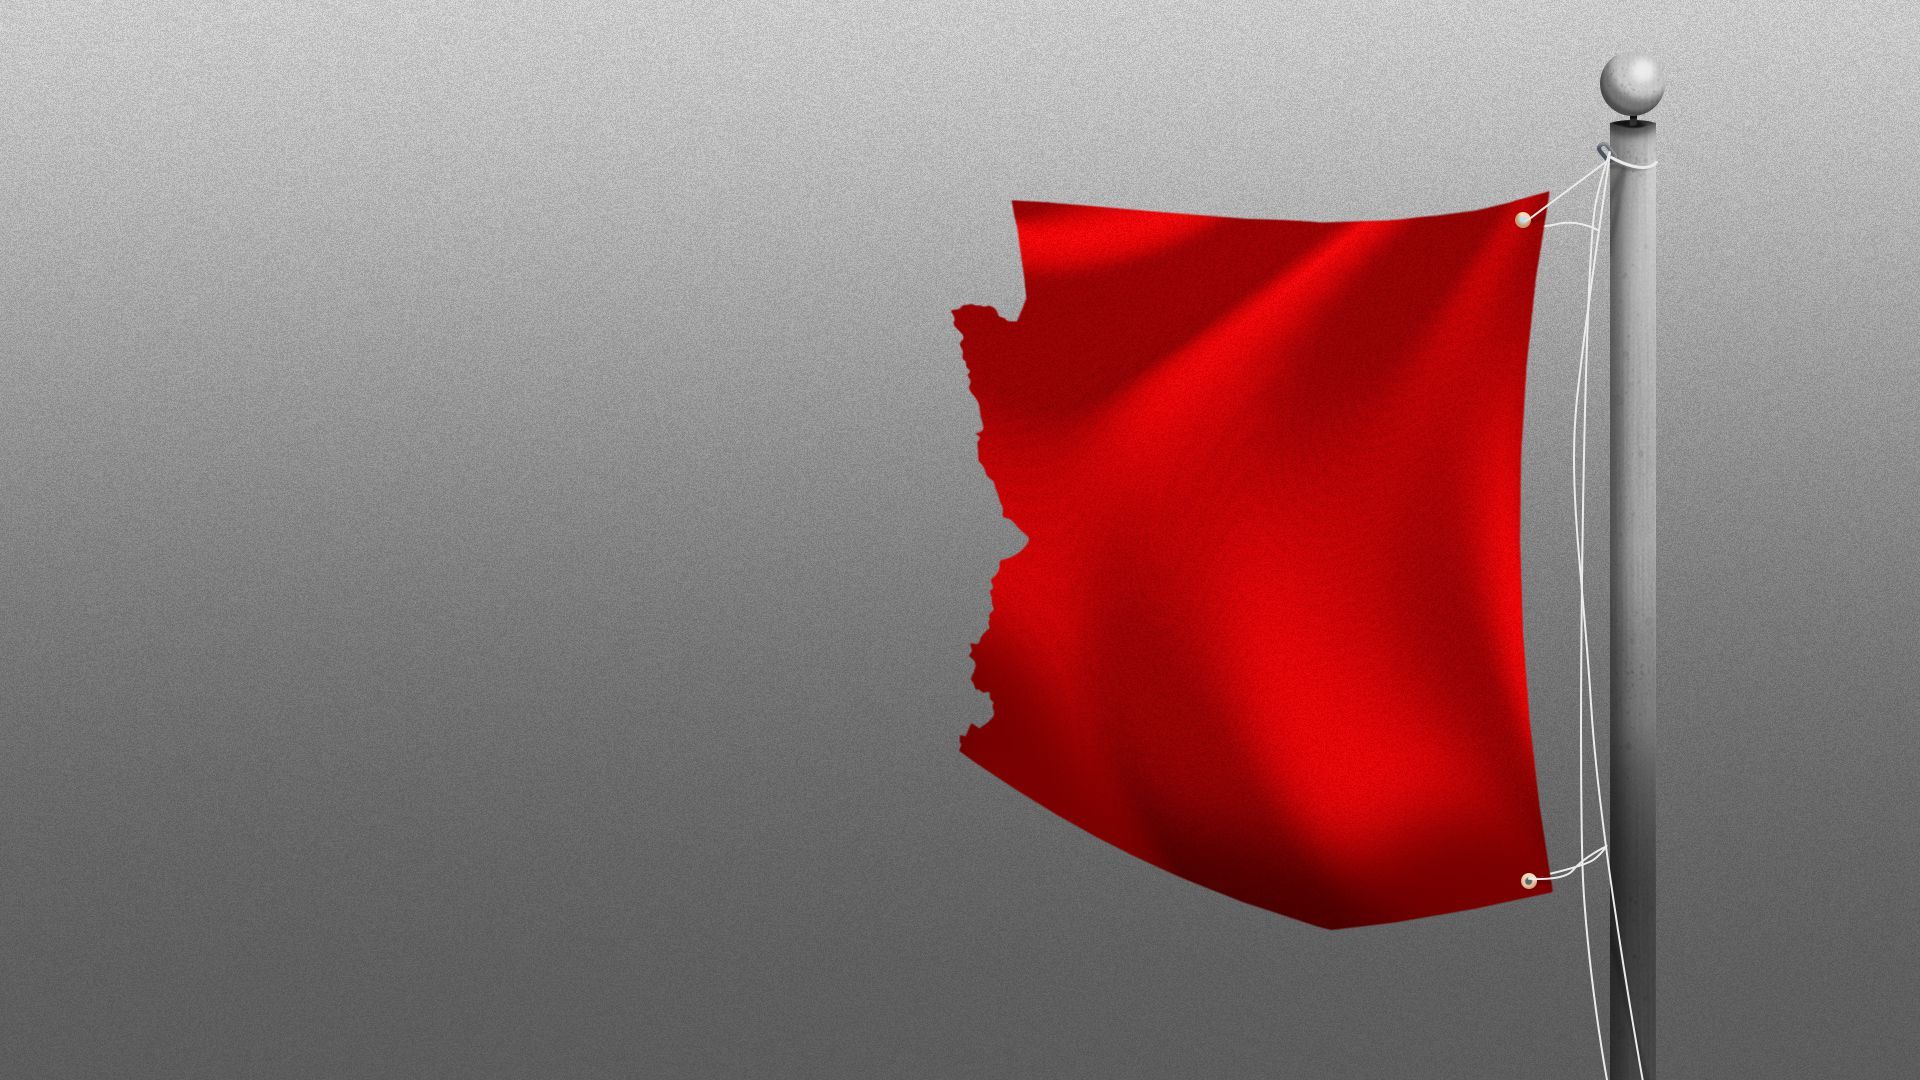 Illustration of a red flag in the shape of Arizona